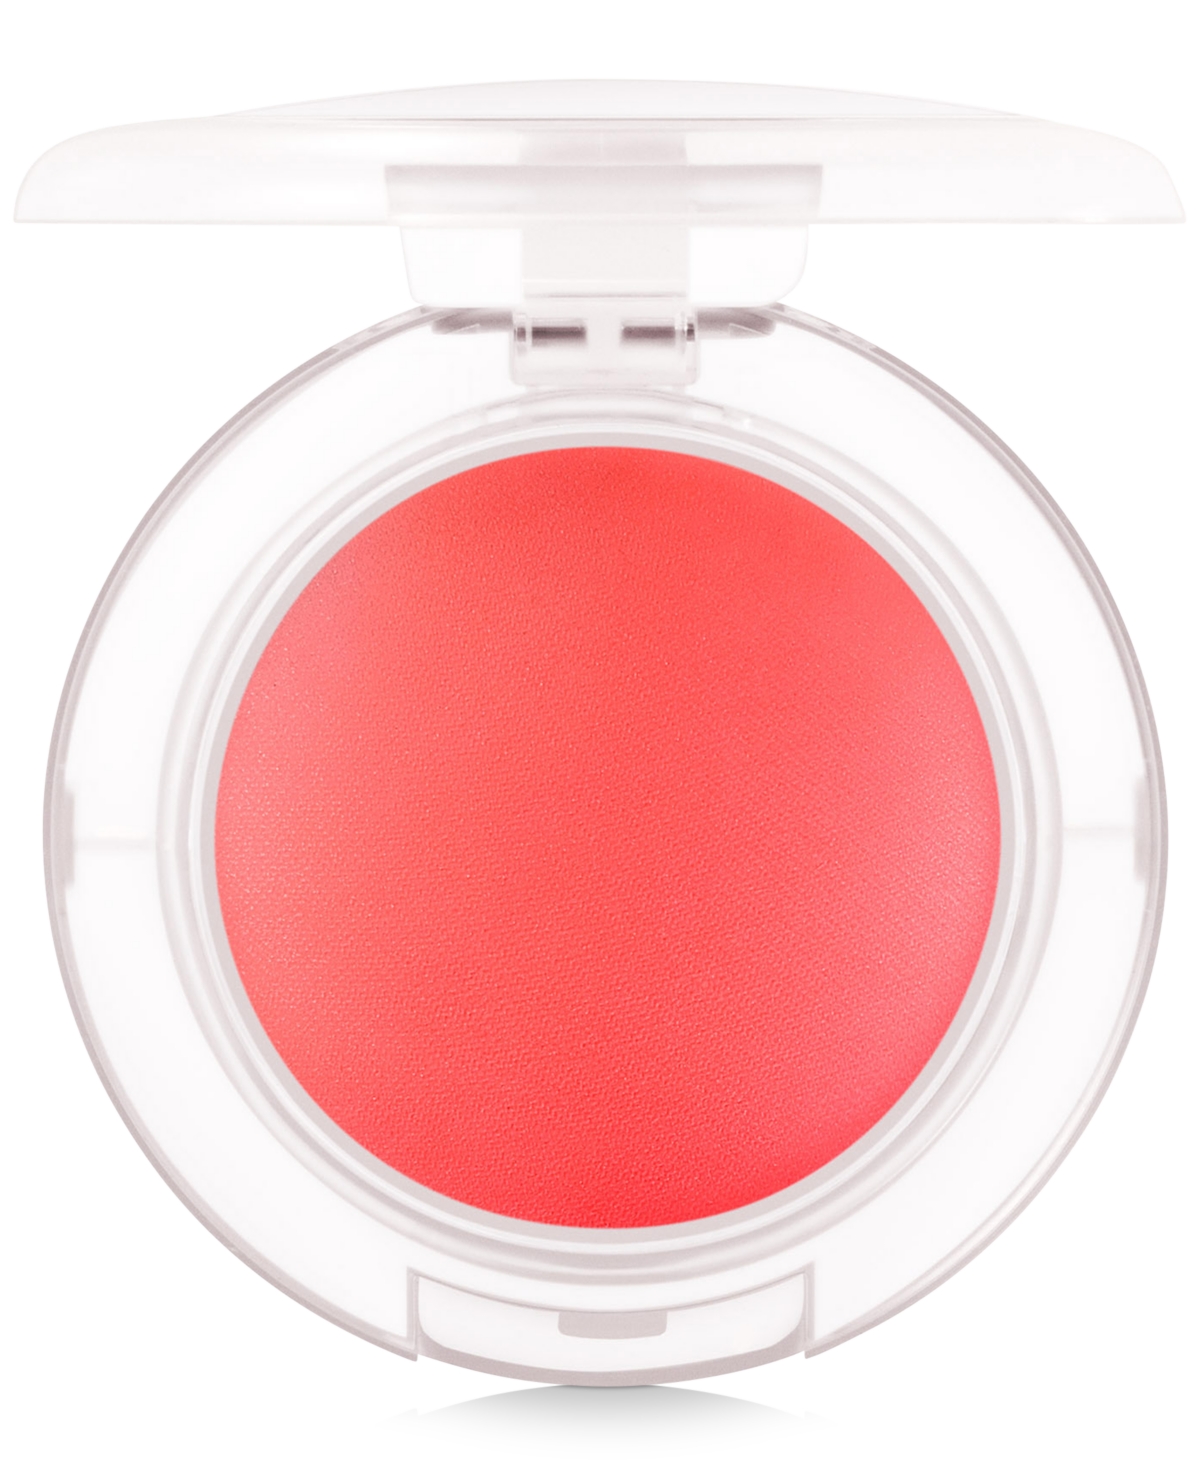 Mac Glow Play Blush In Groovy (bright Pinky Coral)